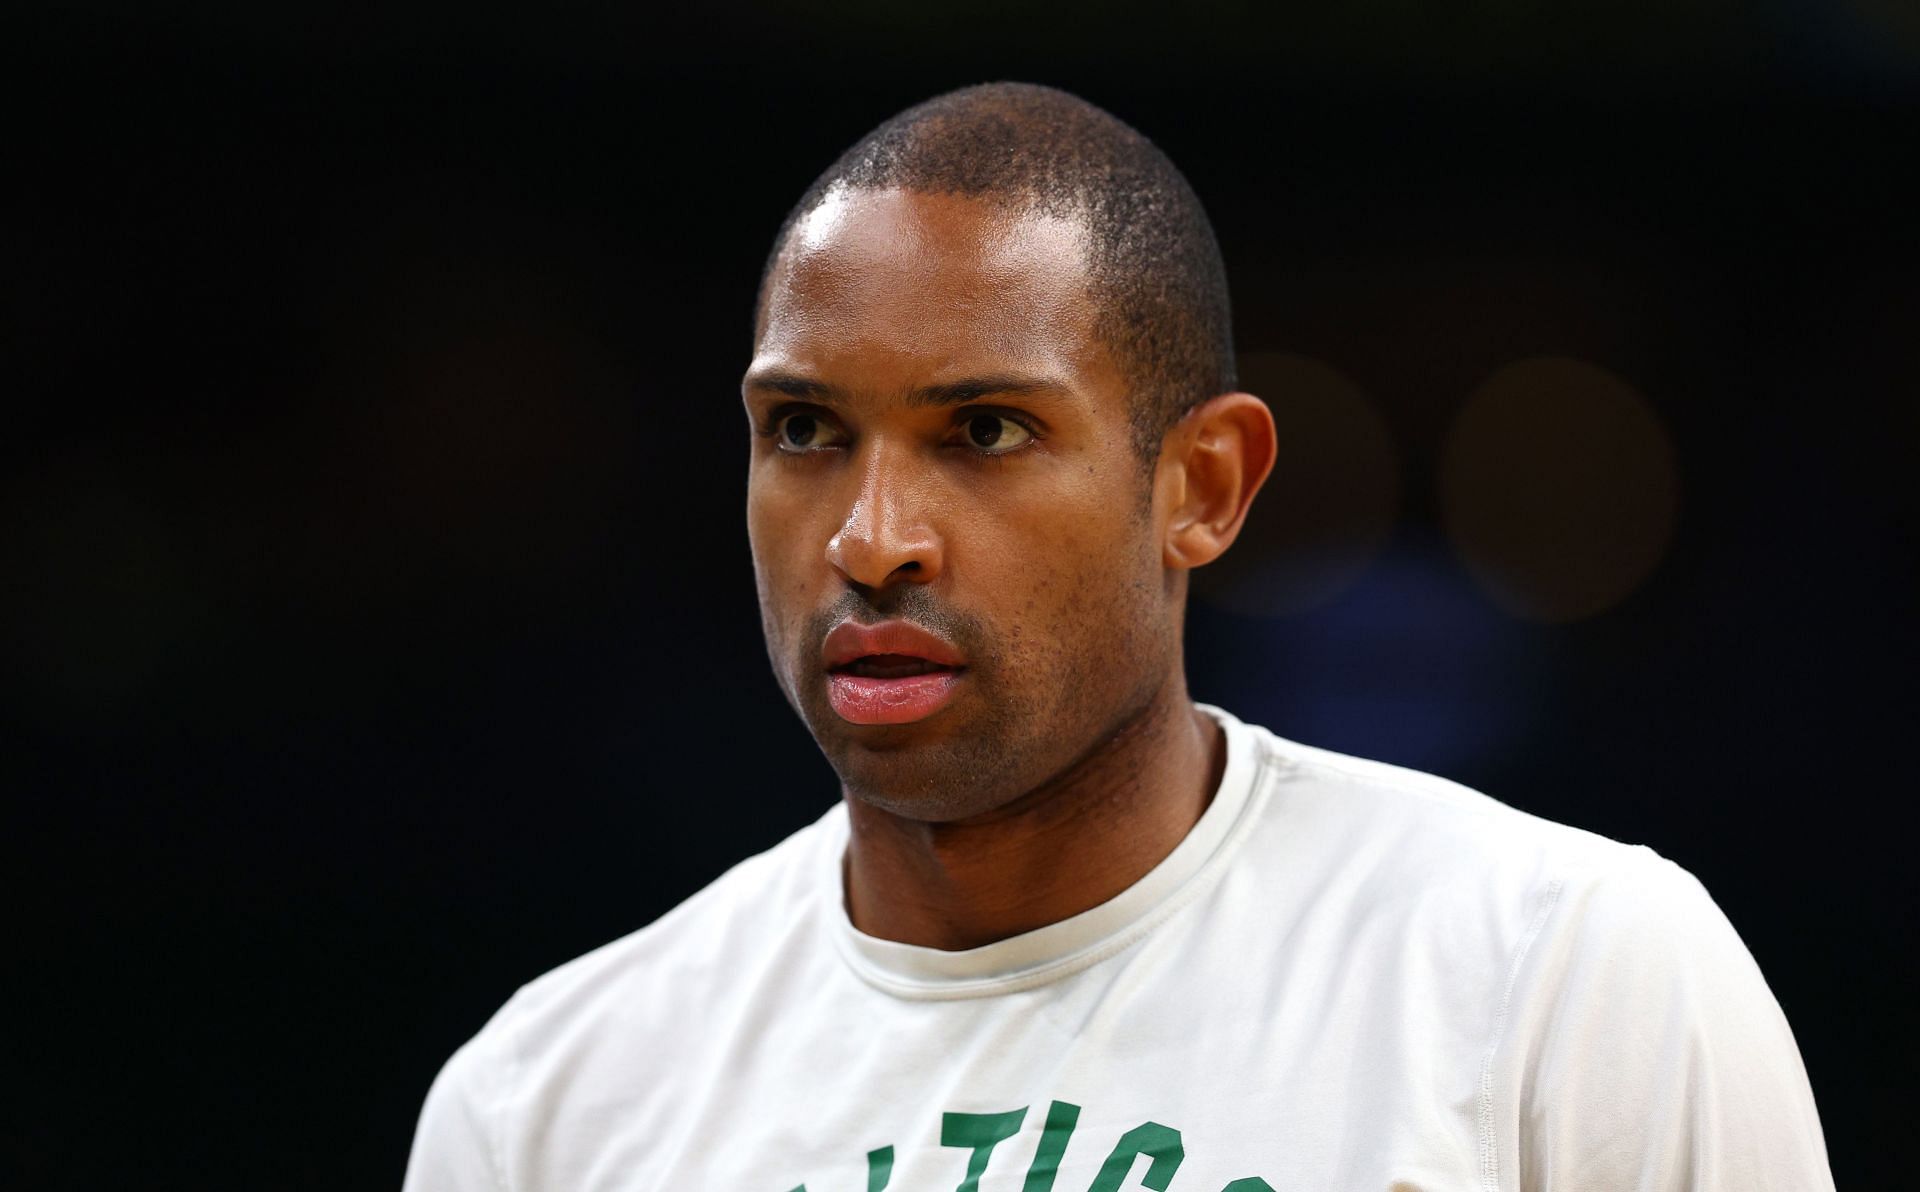 Al Horford is among the most successful Hispanic players in the league (Image via Getty Images)